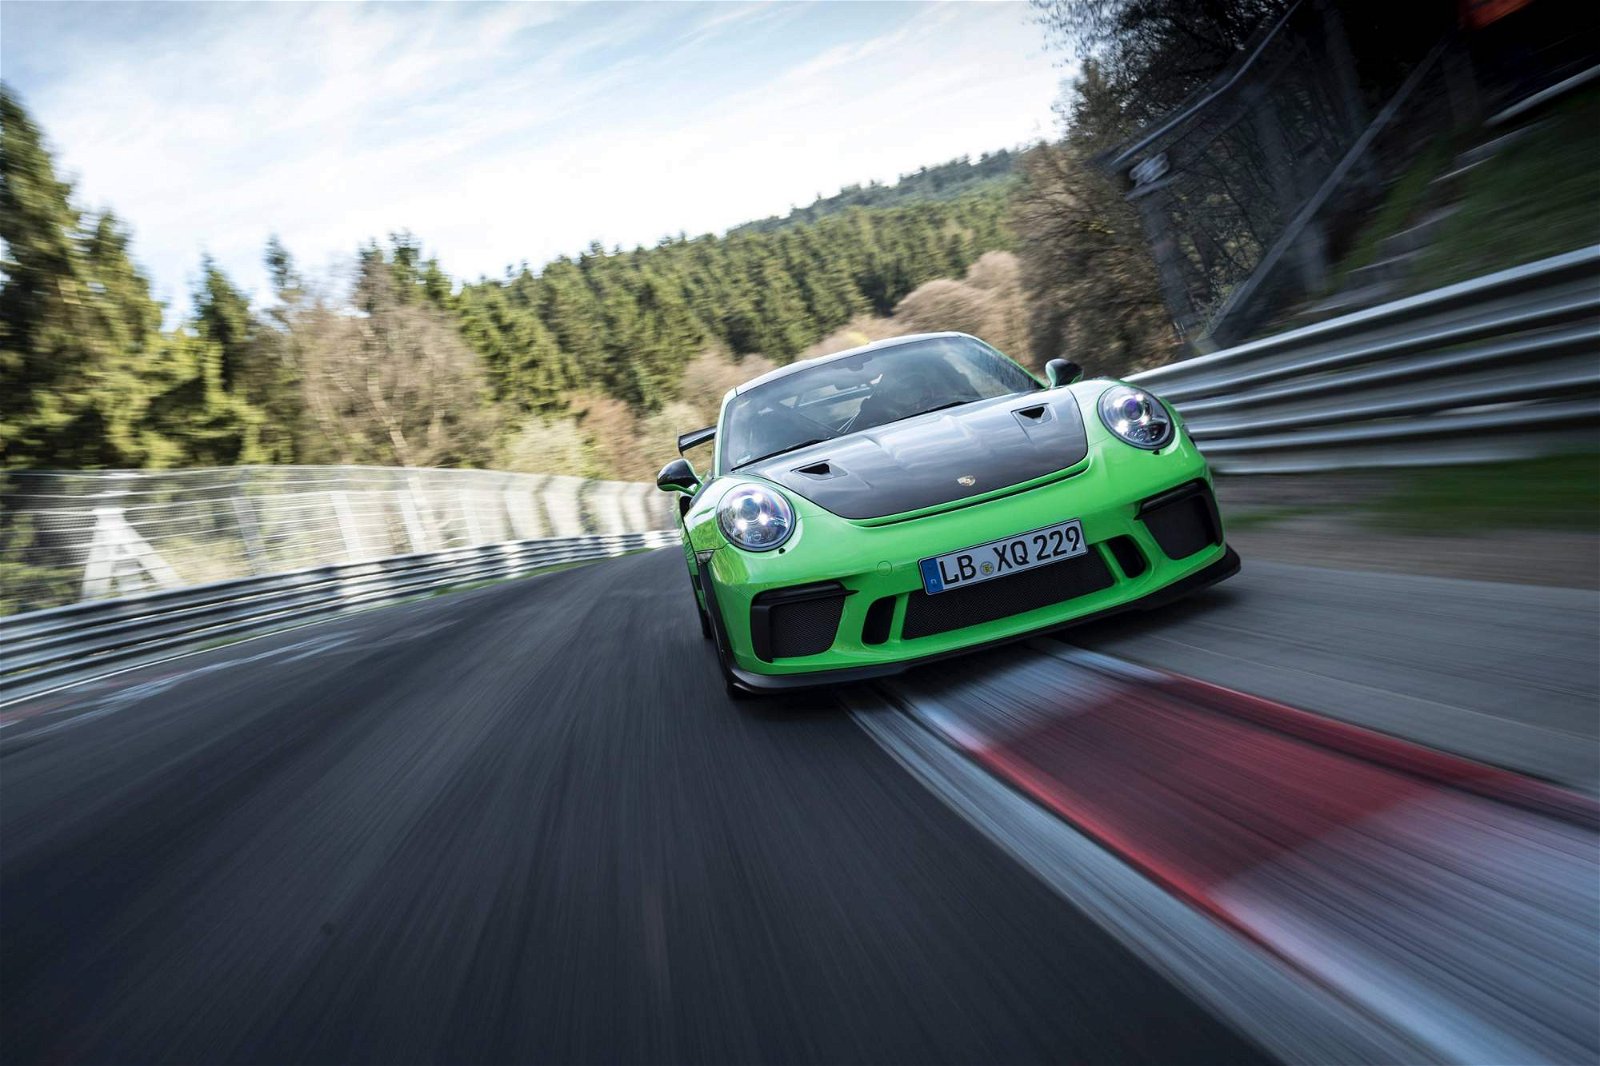 2018-Porsche-911-GT3-RS-at-the-Nurburgring-Nordschleife-3